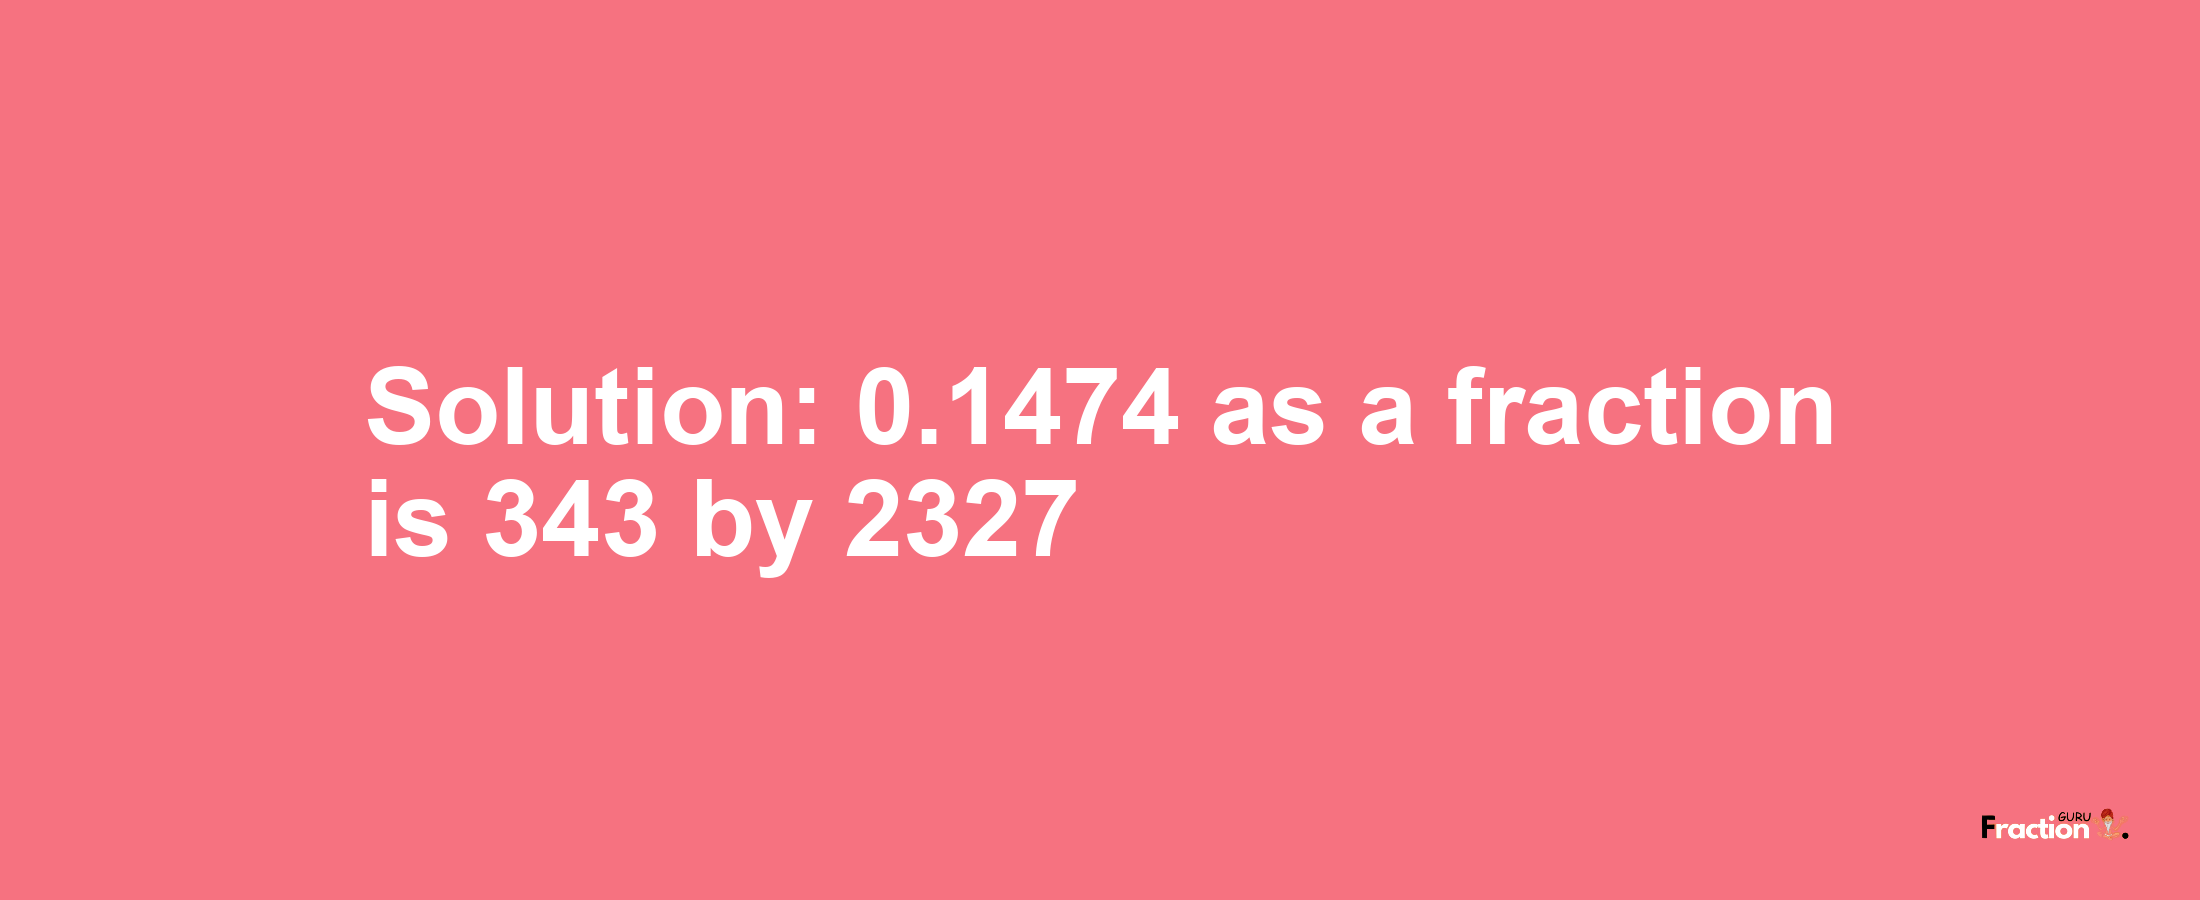 Solution:0.1474 as a fraction is 343/2327